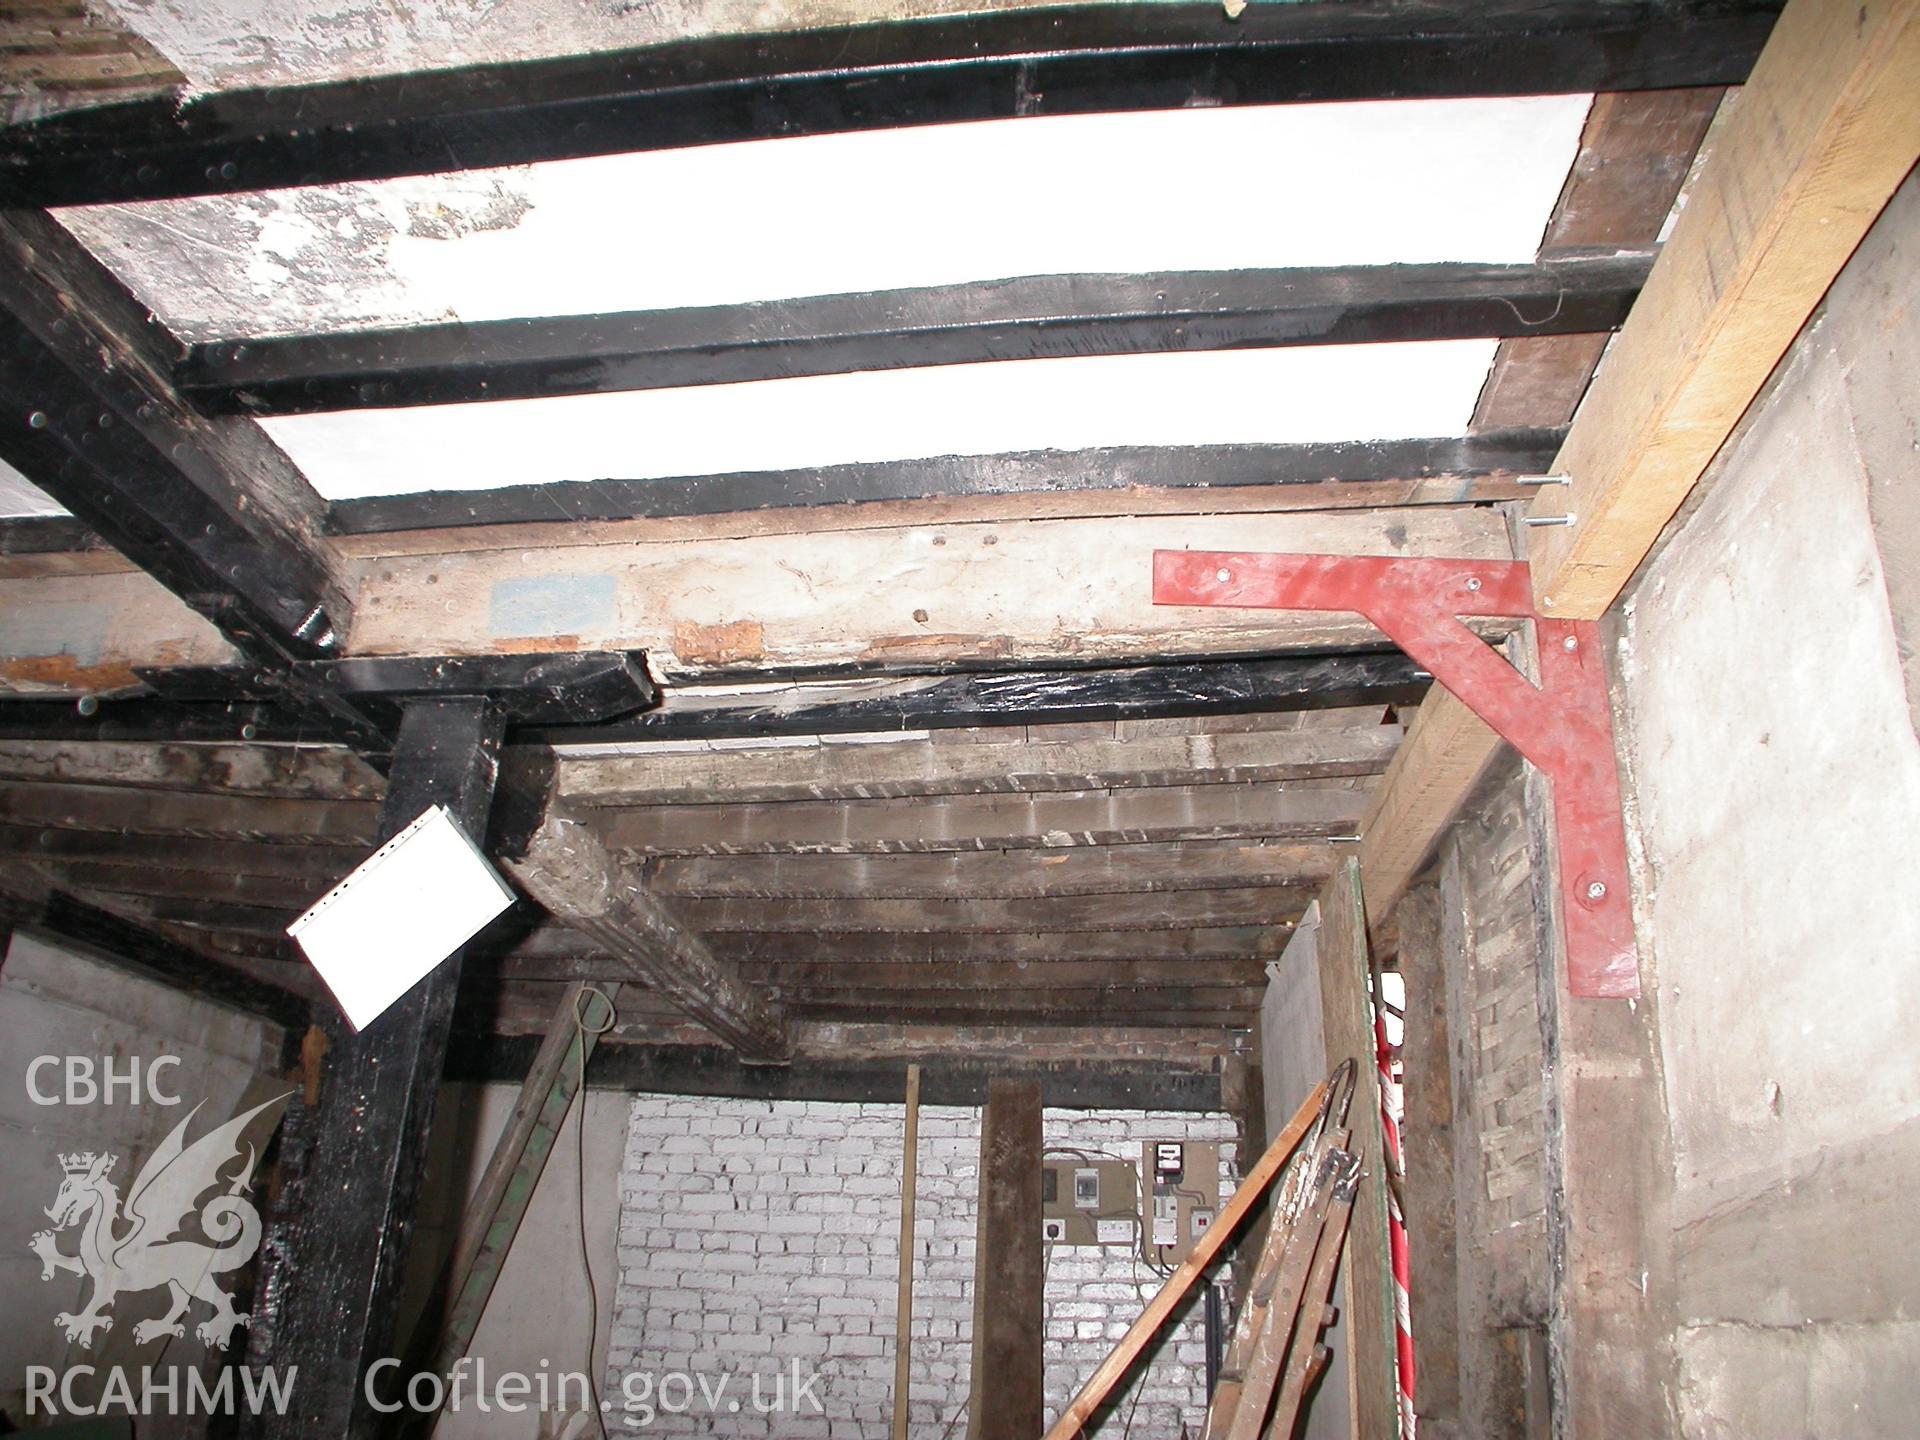 Ground-floor, at site of cross-partition under ceiling beam.